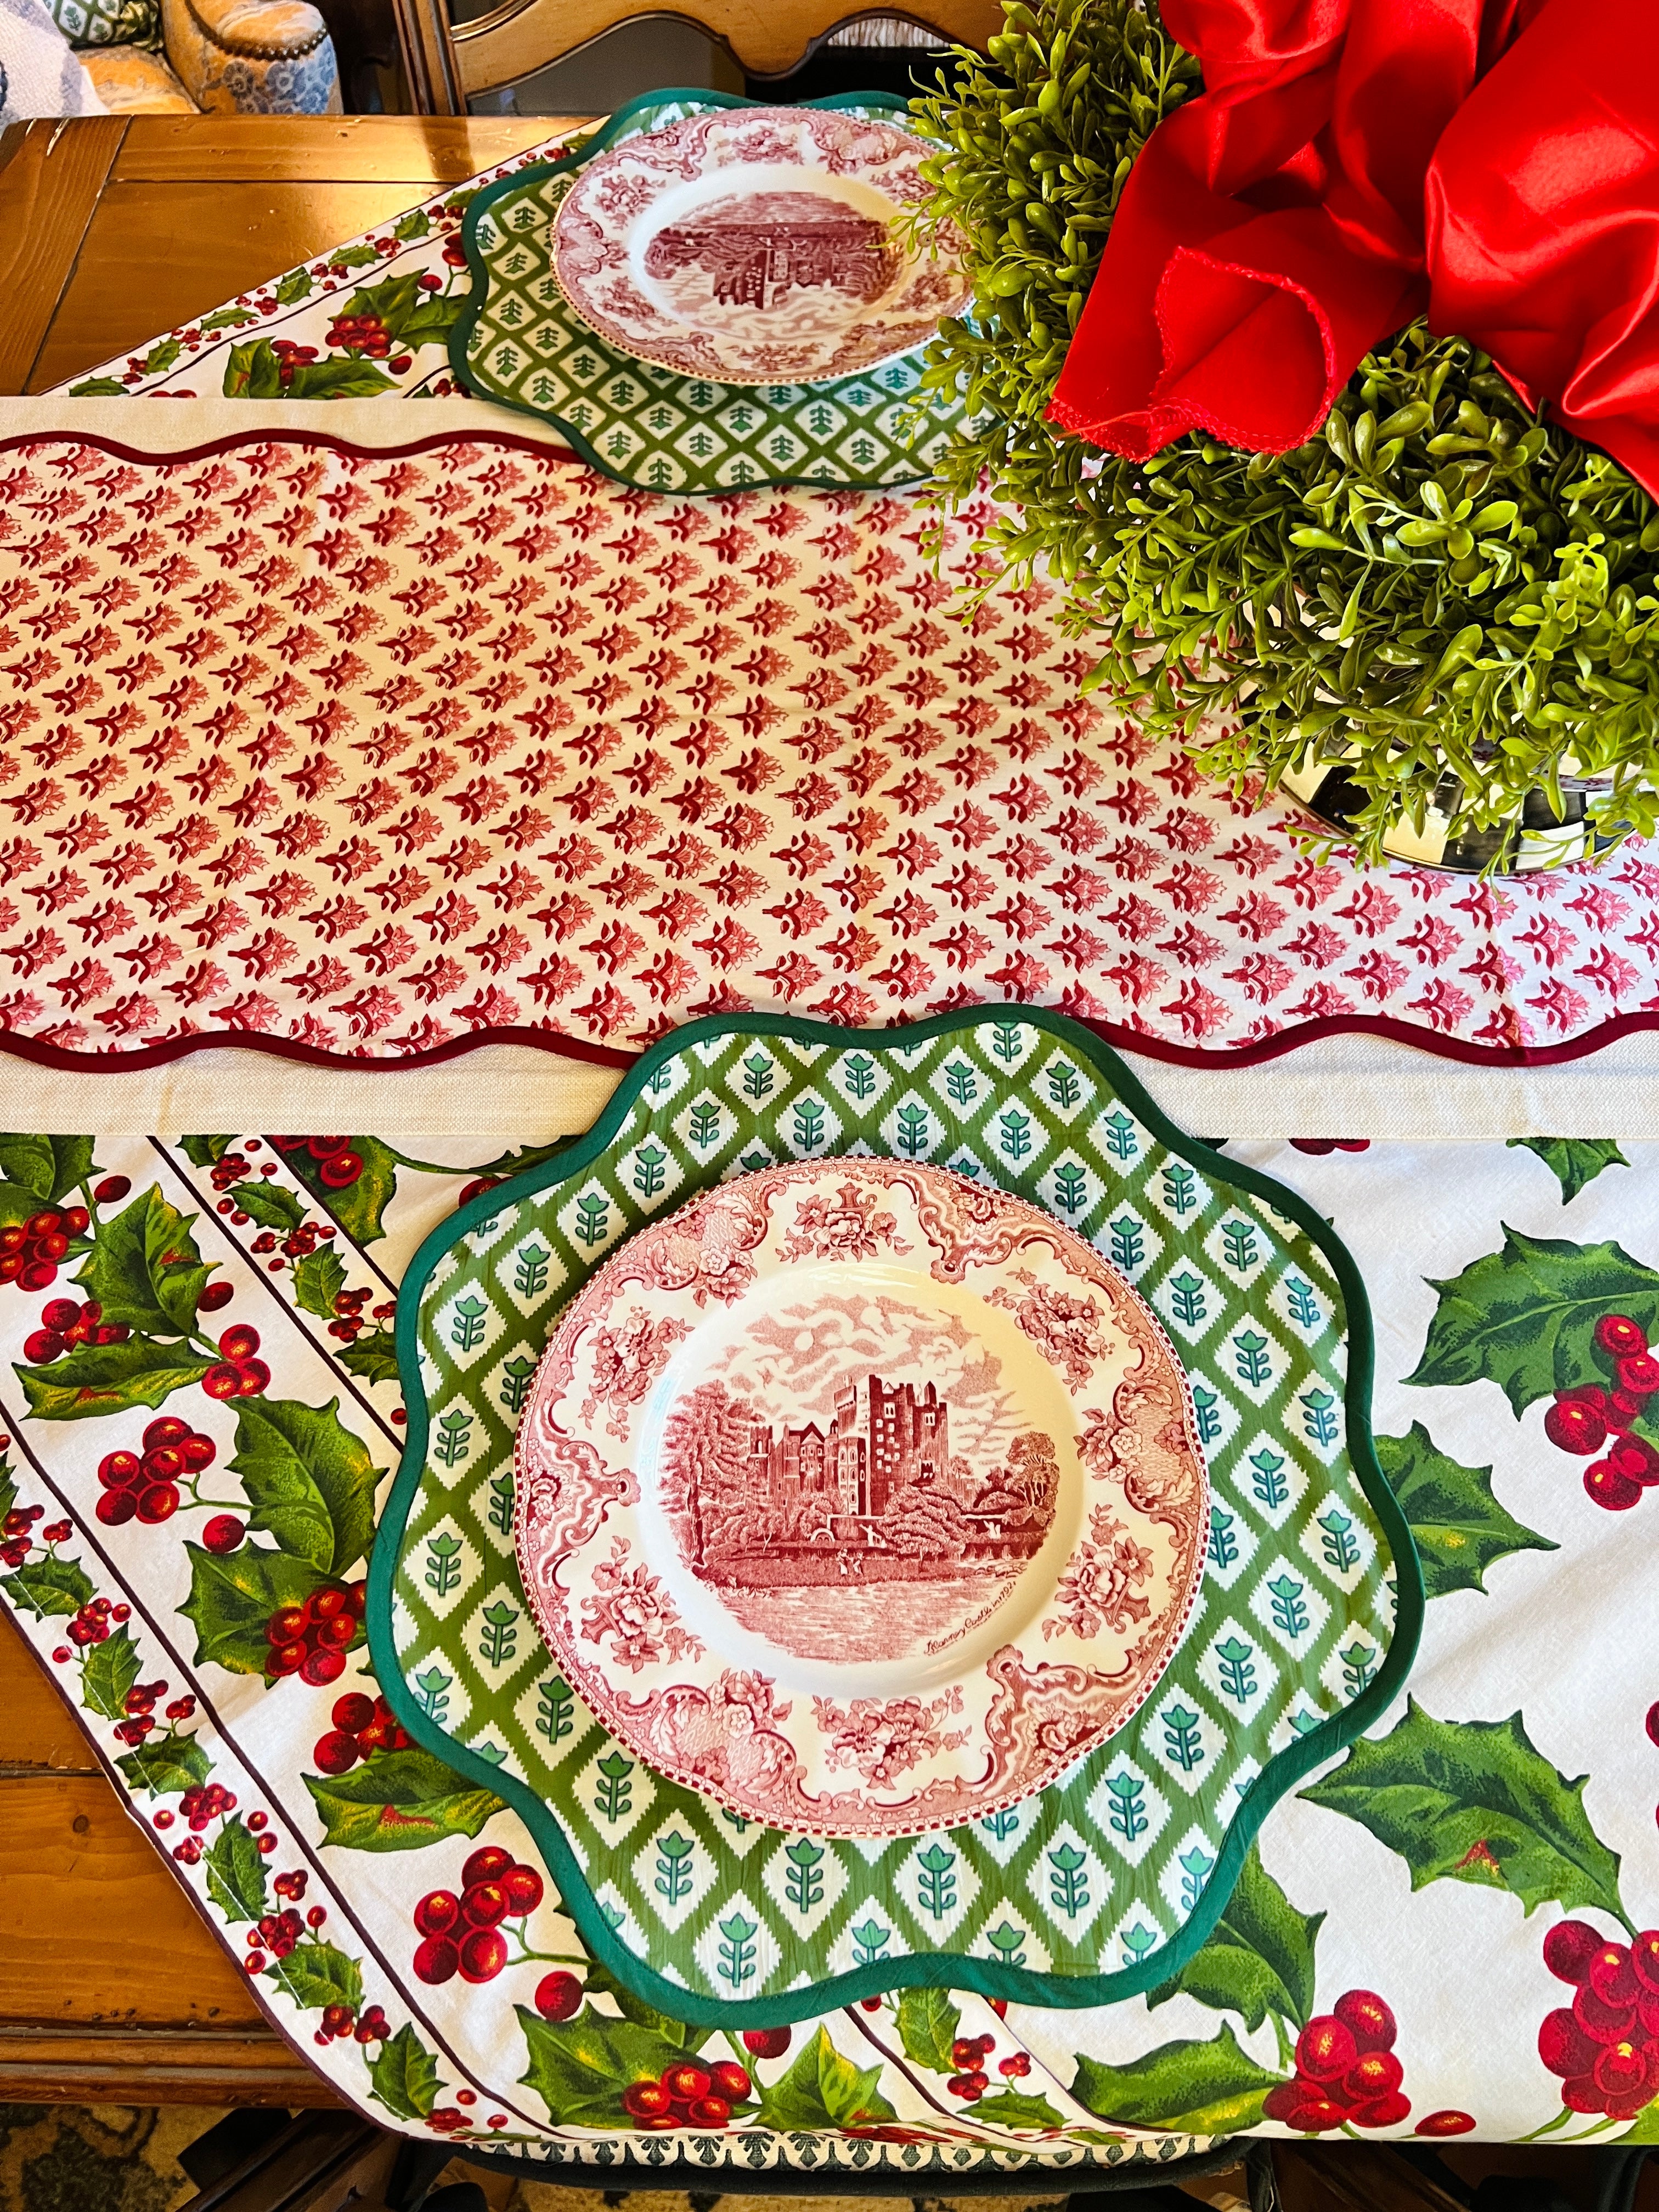 Red block print scalloped table runner with contrast piping